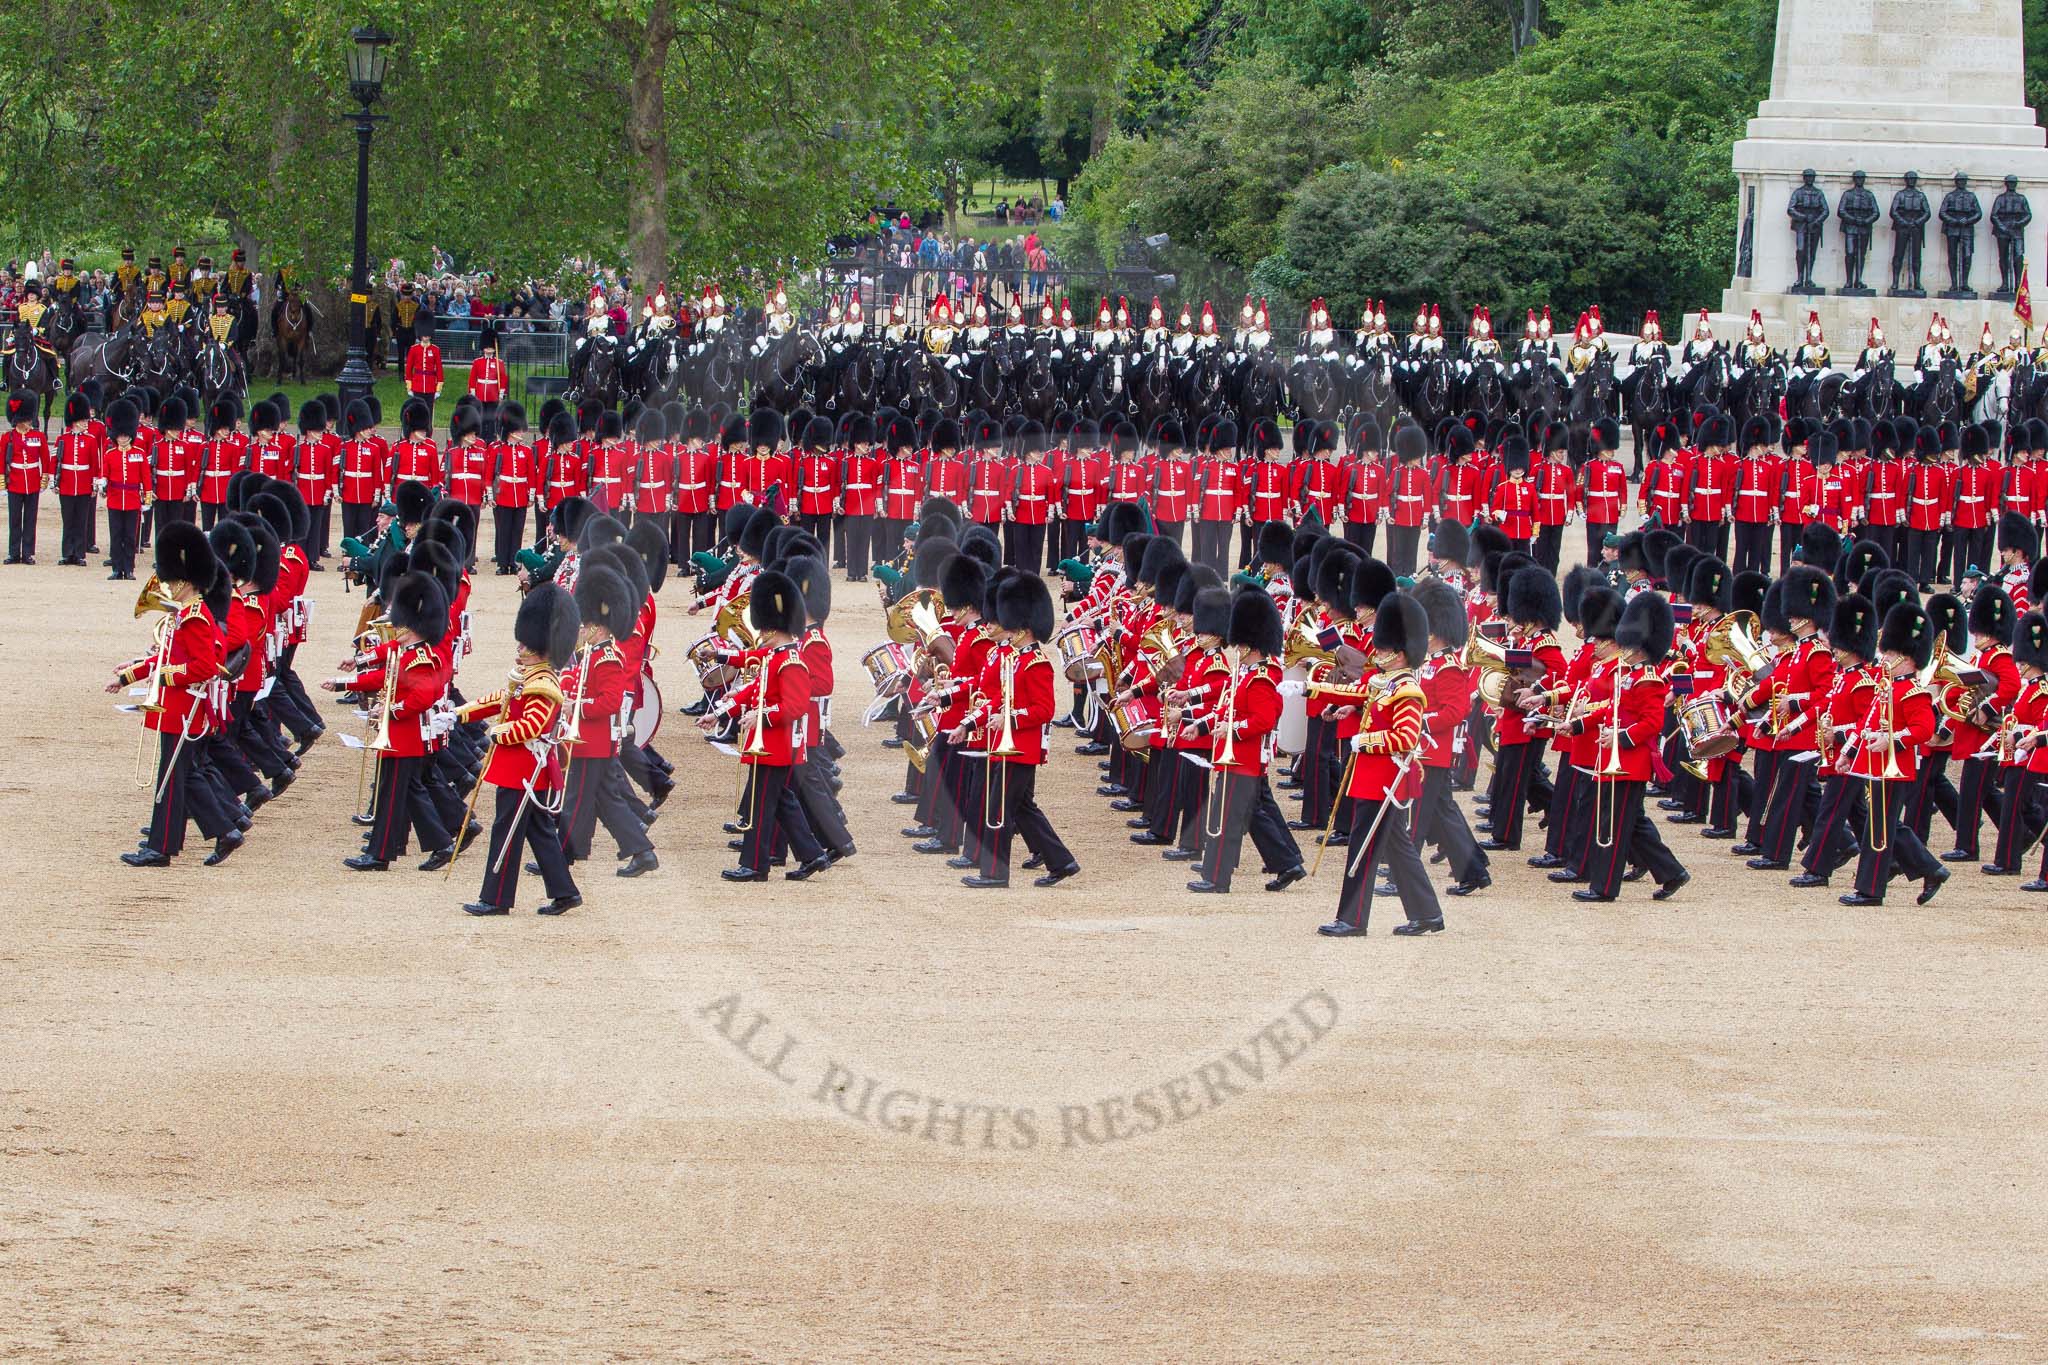 The Colonel's Review 2012: The Massed Bands are moving from the centre of Horse Guards Parade towards their initial position on the western side..
Horse Guards Parade, Westminster,
London SW1,

United Kingdom,
on 09 June 2012 at 11:49, image #368